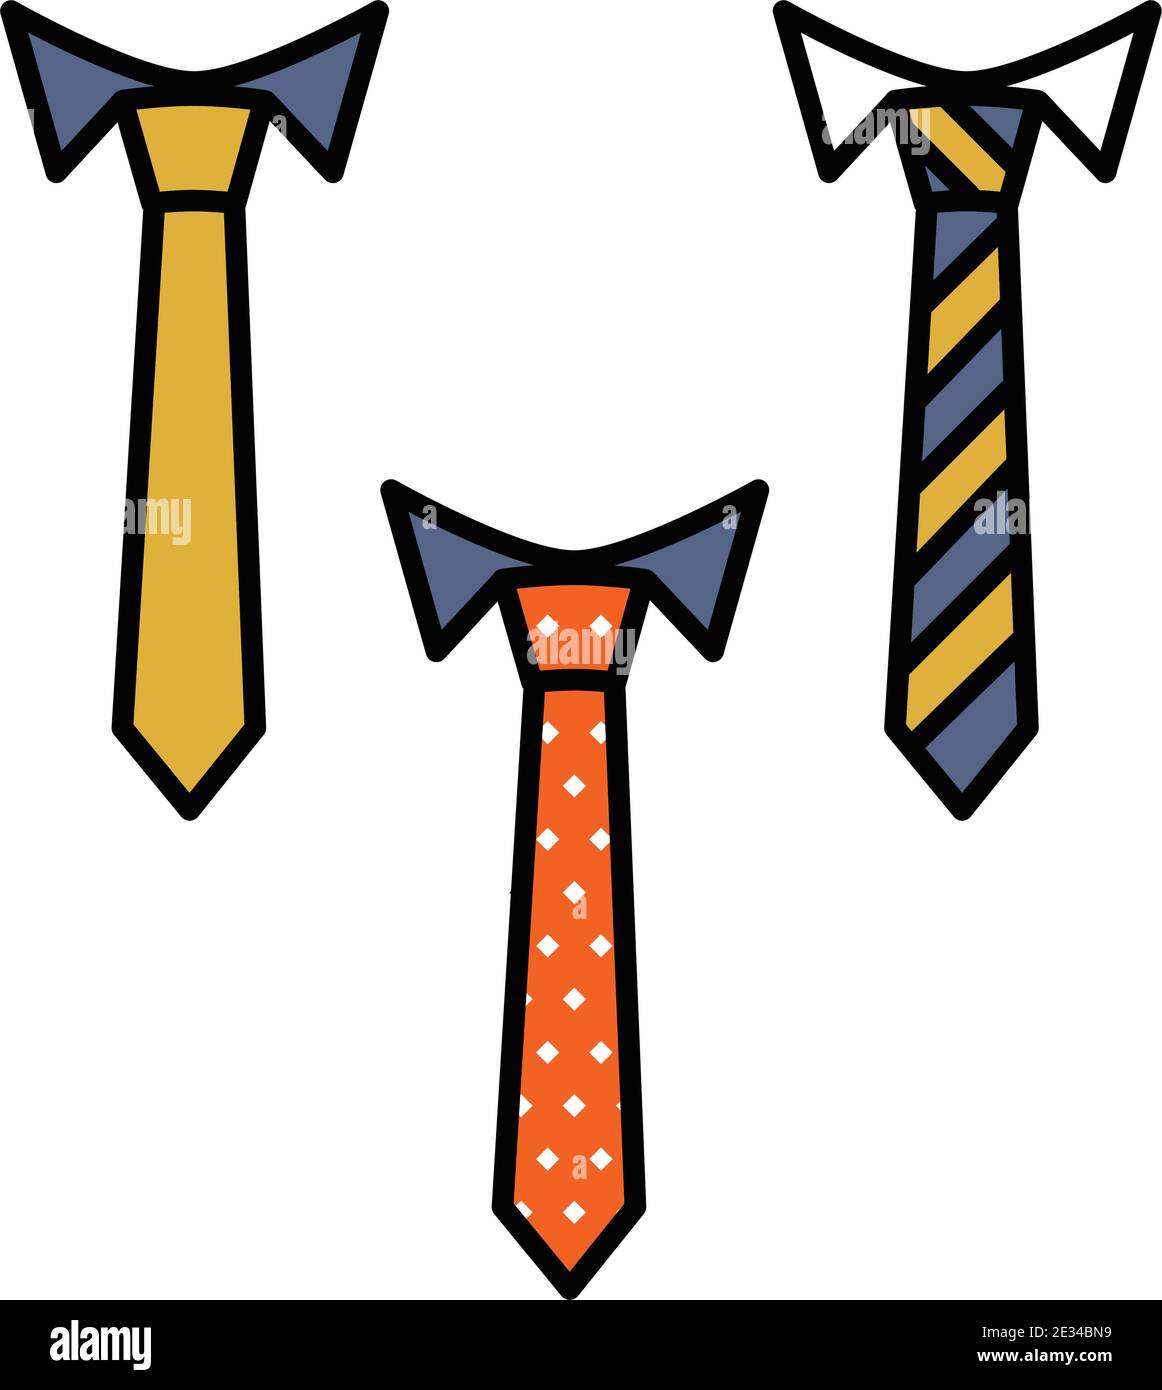 Tie Bars & Tie Clips  Unique and Colored Styles - Art of The Gentleman